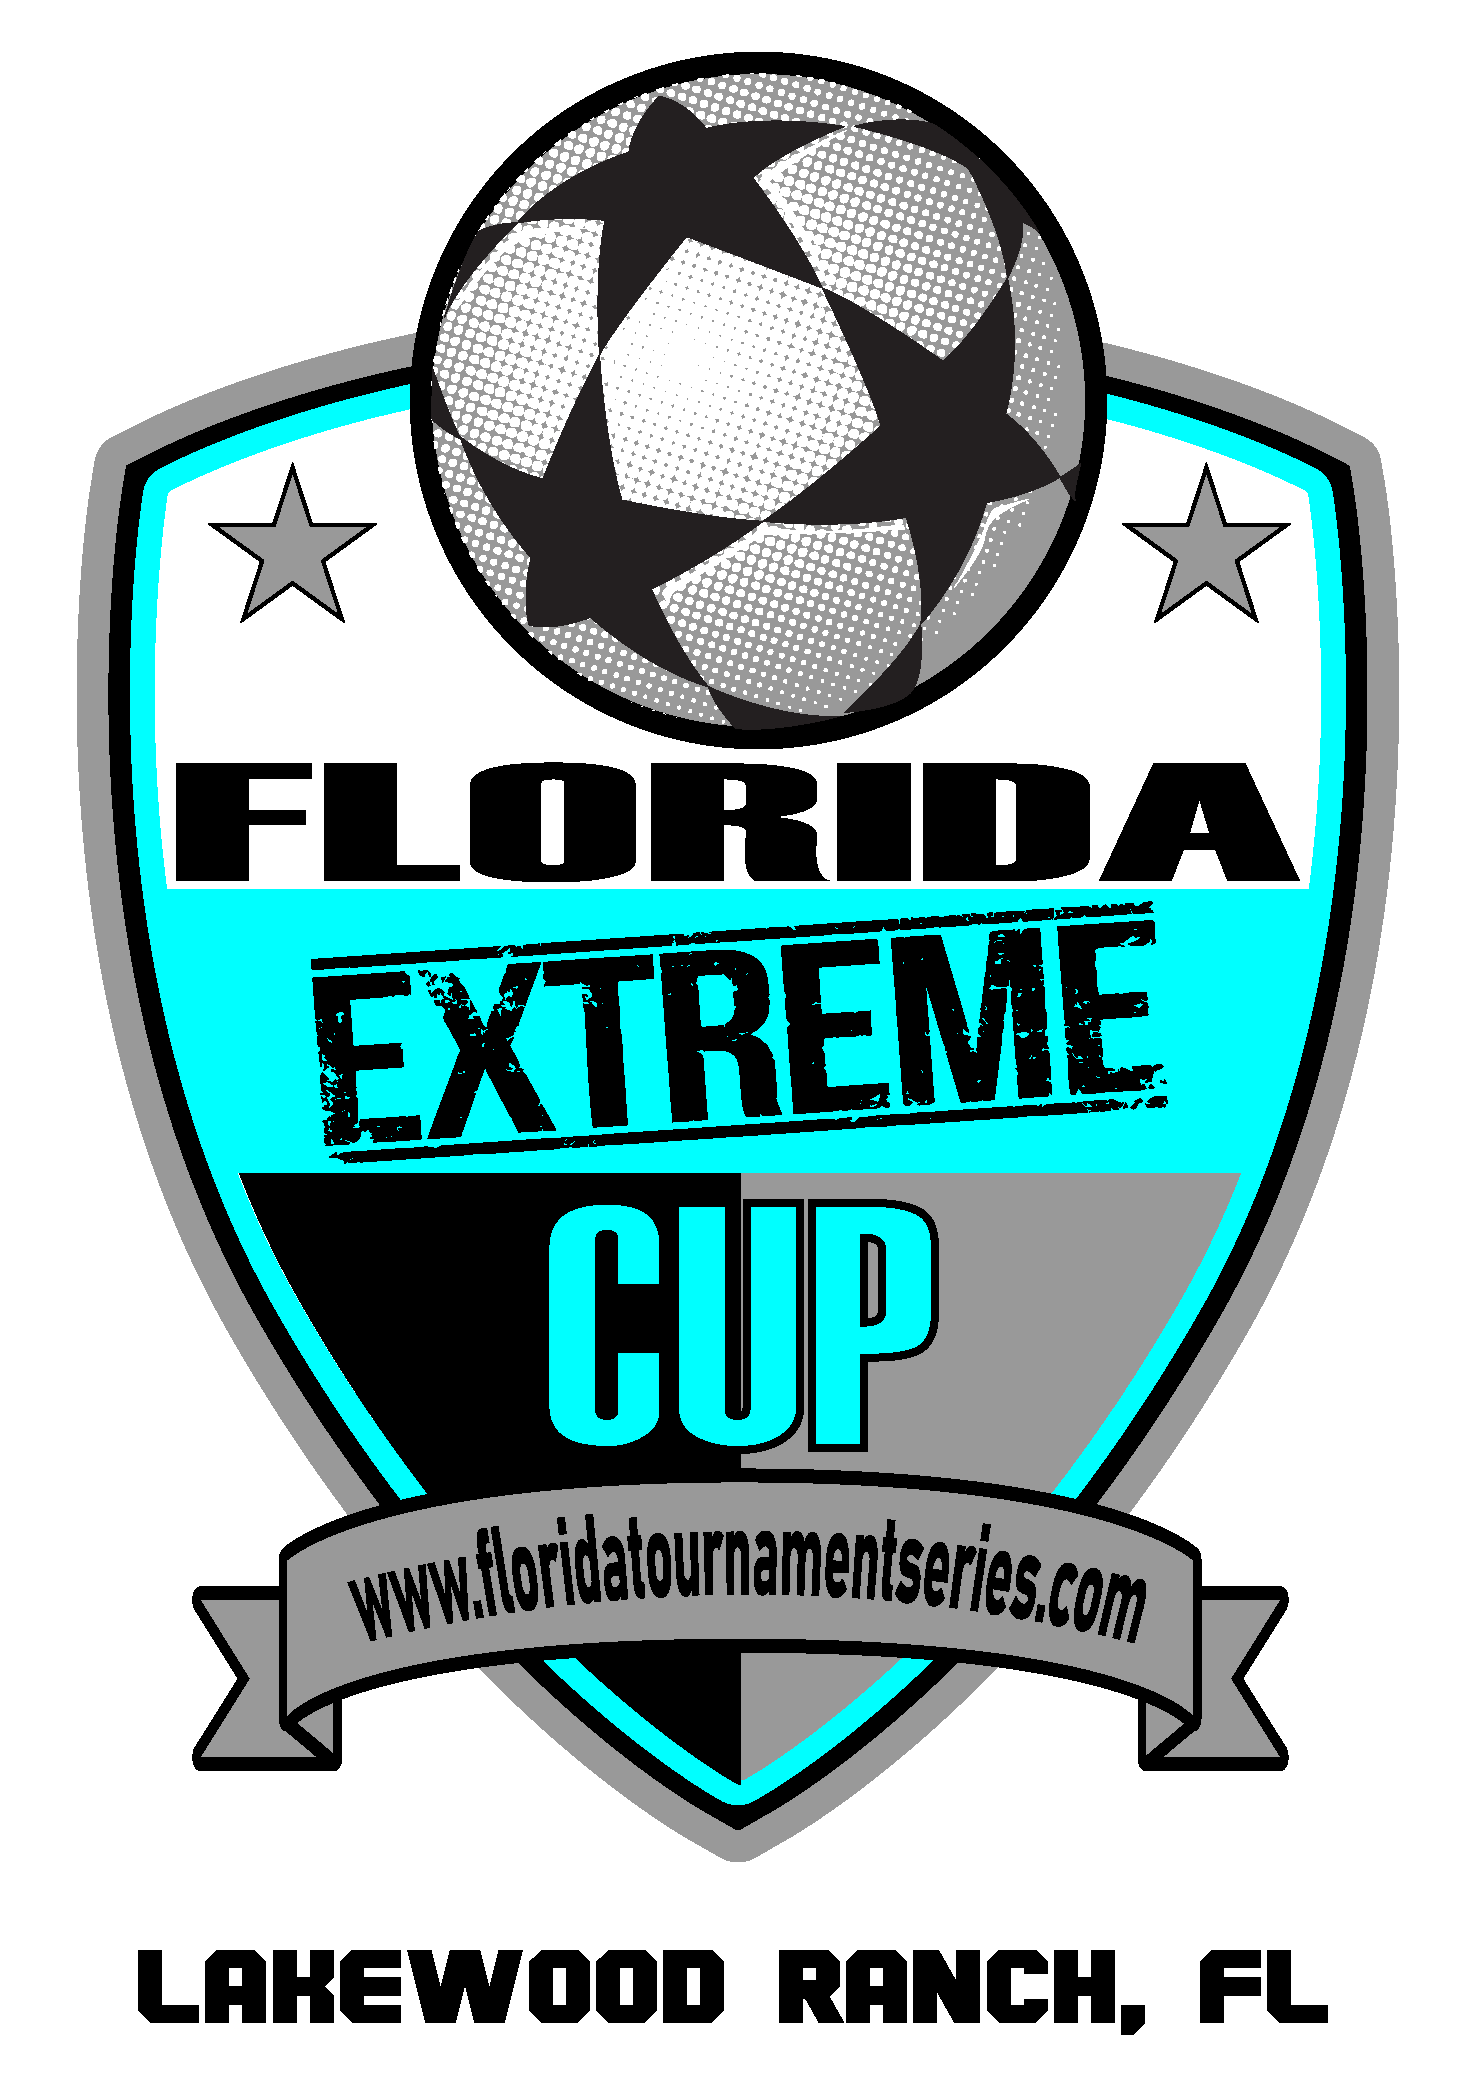 Soccer Management Company Florida Extreme Cup Soccer Tournament